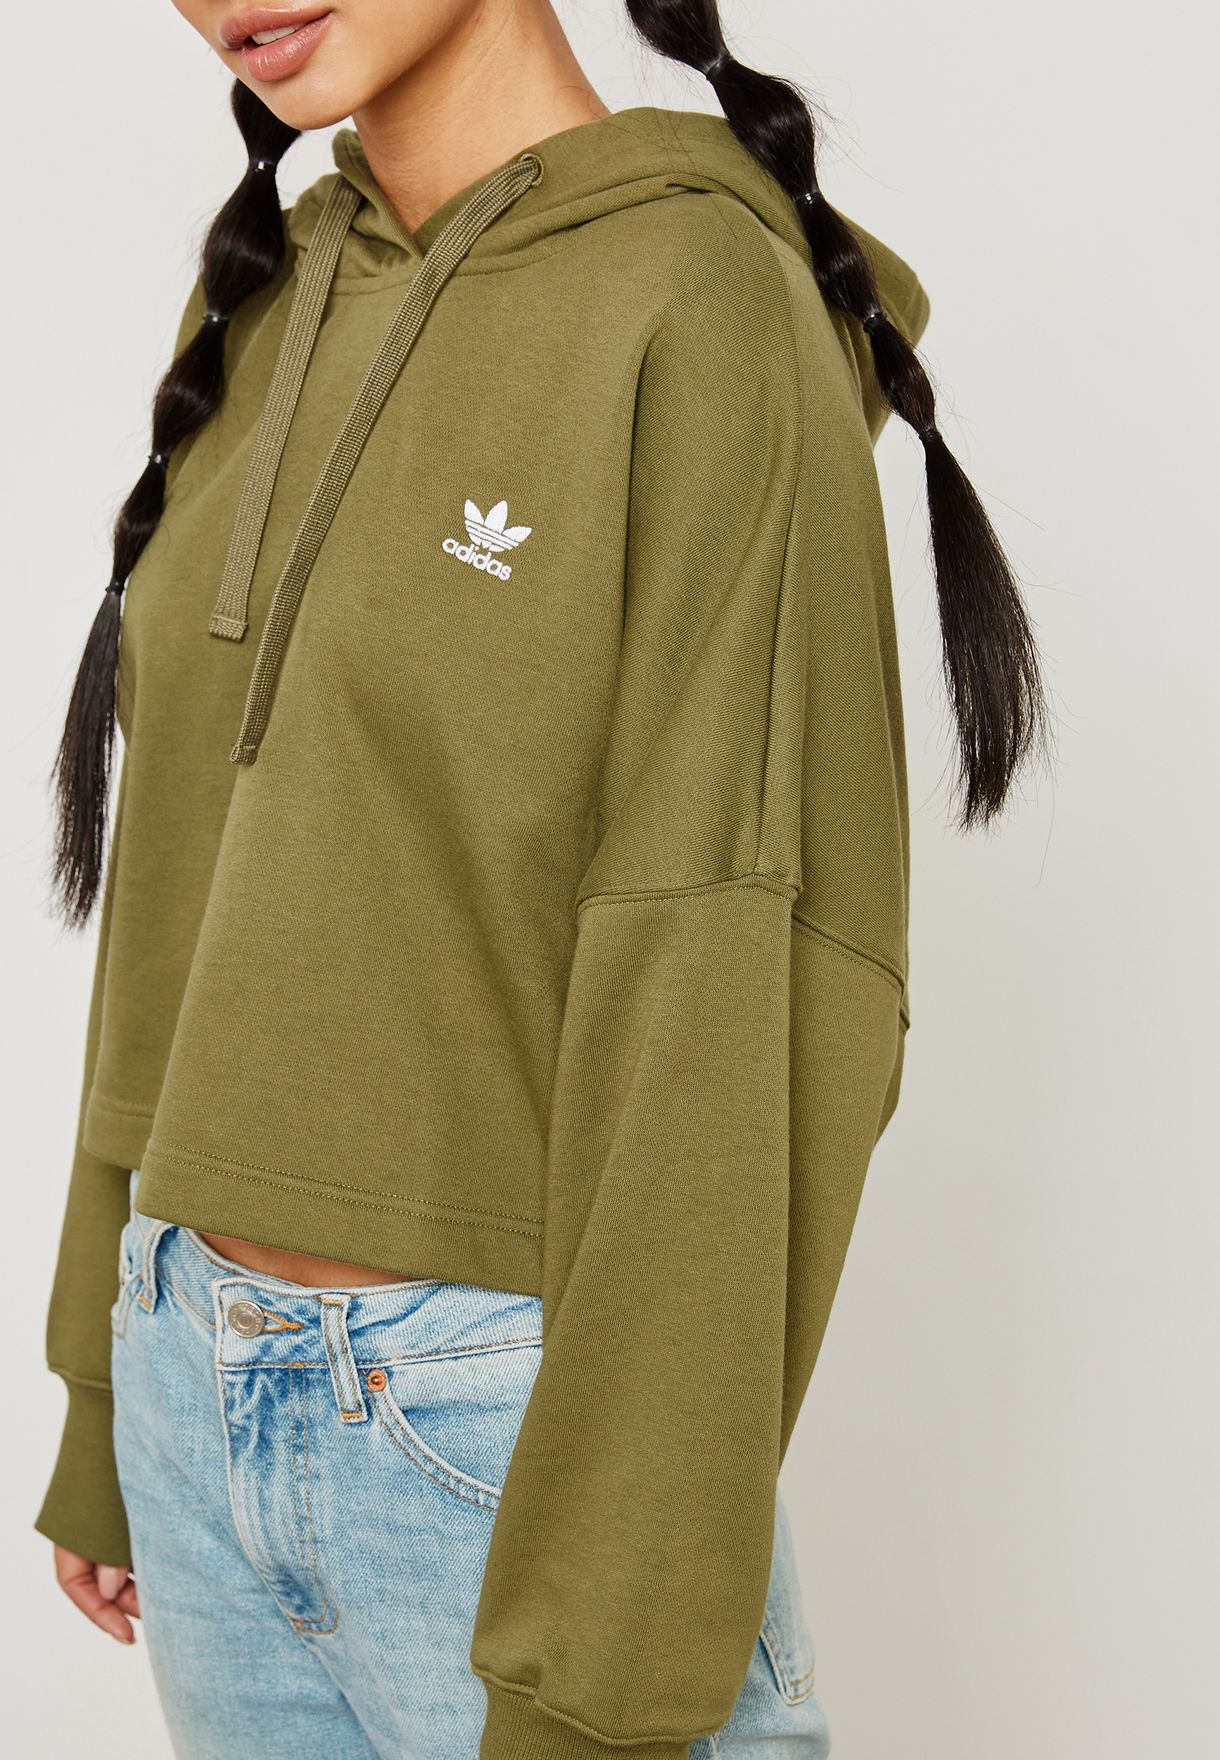 adidas styling complements cropped hoodie